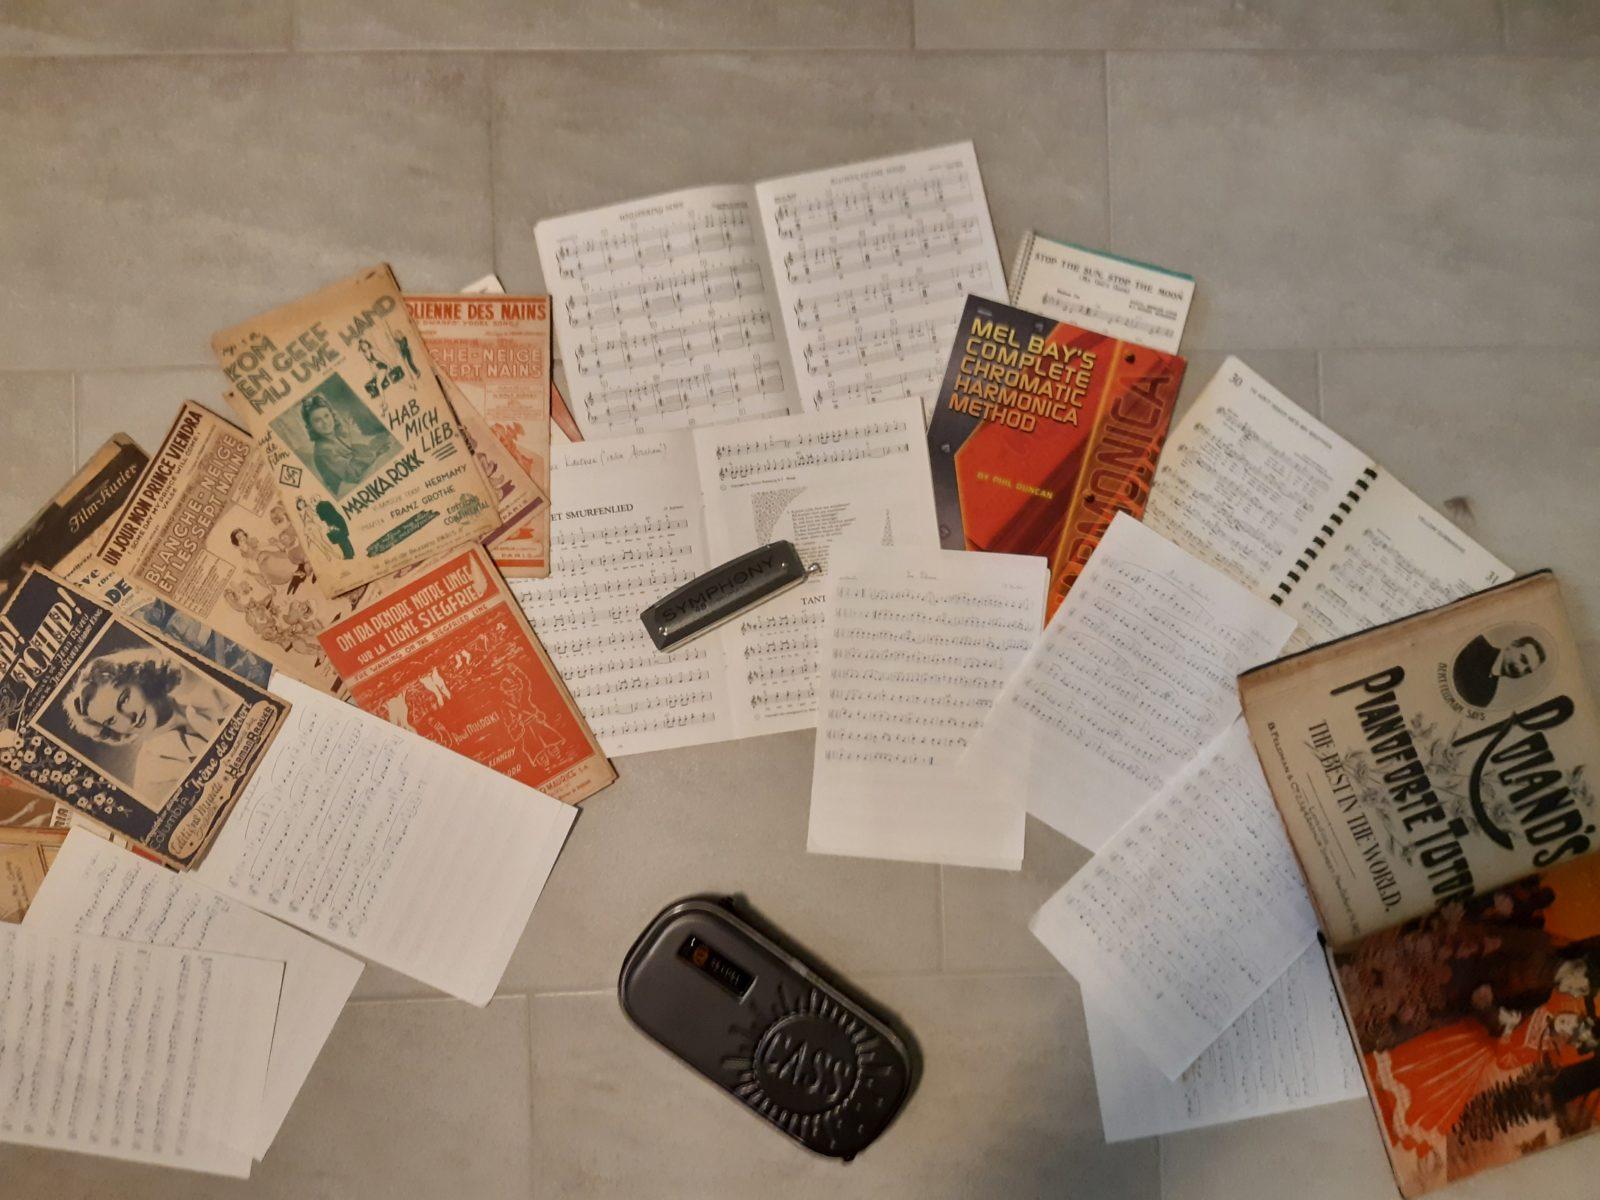 My harmonica + music sheets. Some old and new ones